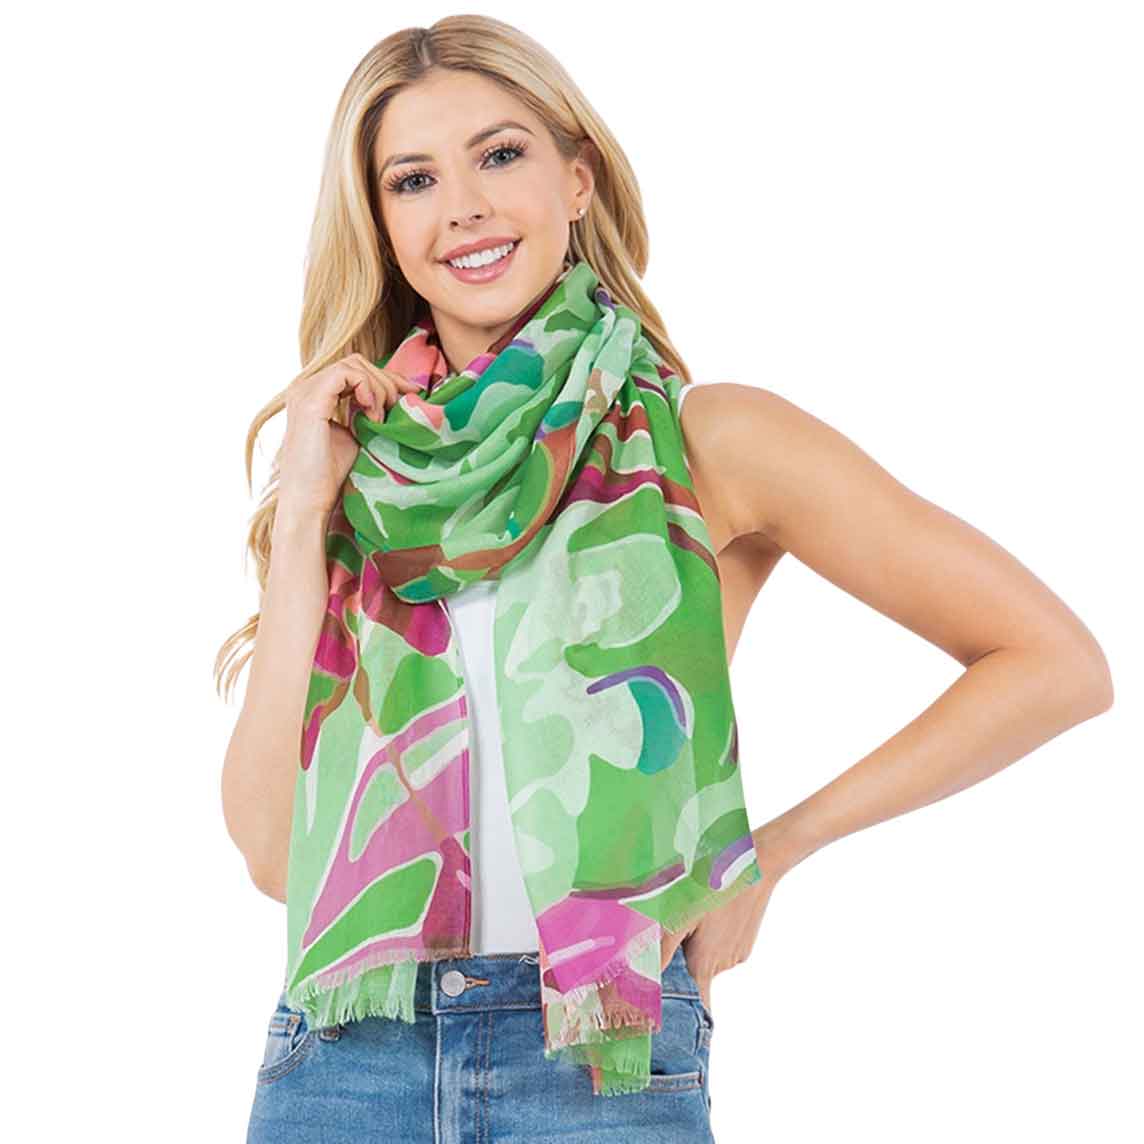 4281-02
Abstract Pattern Scarf